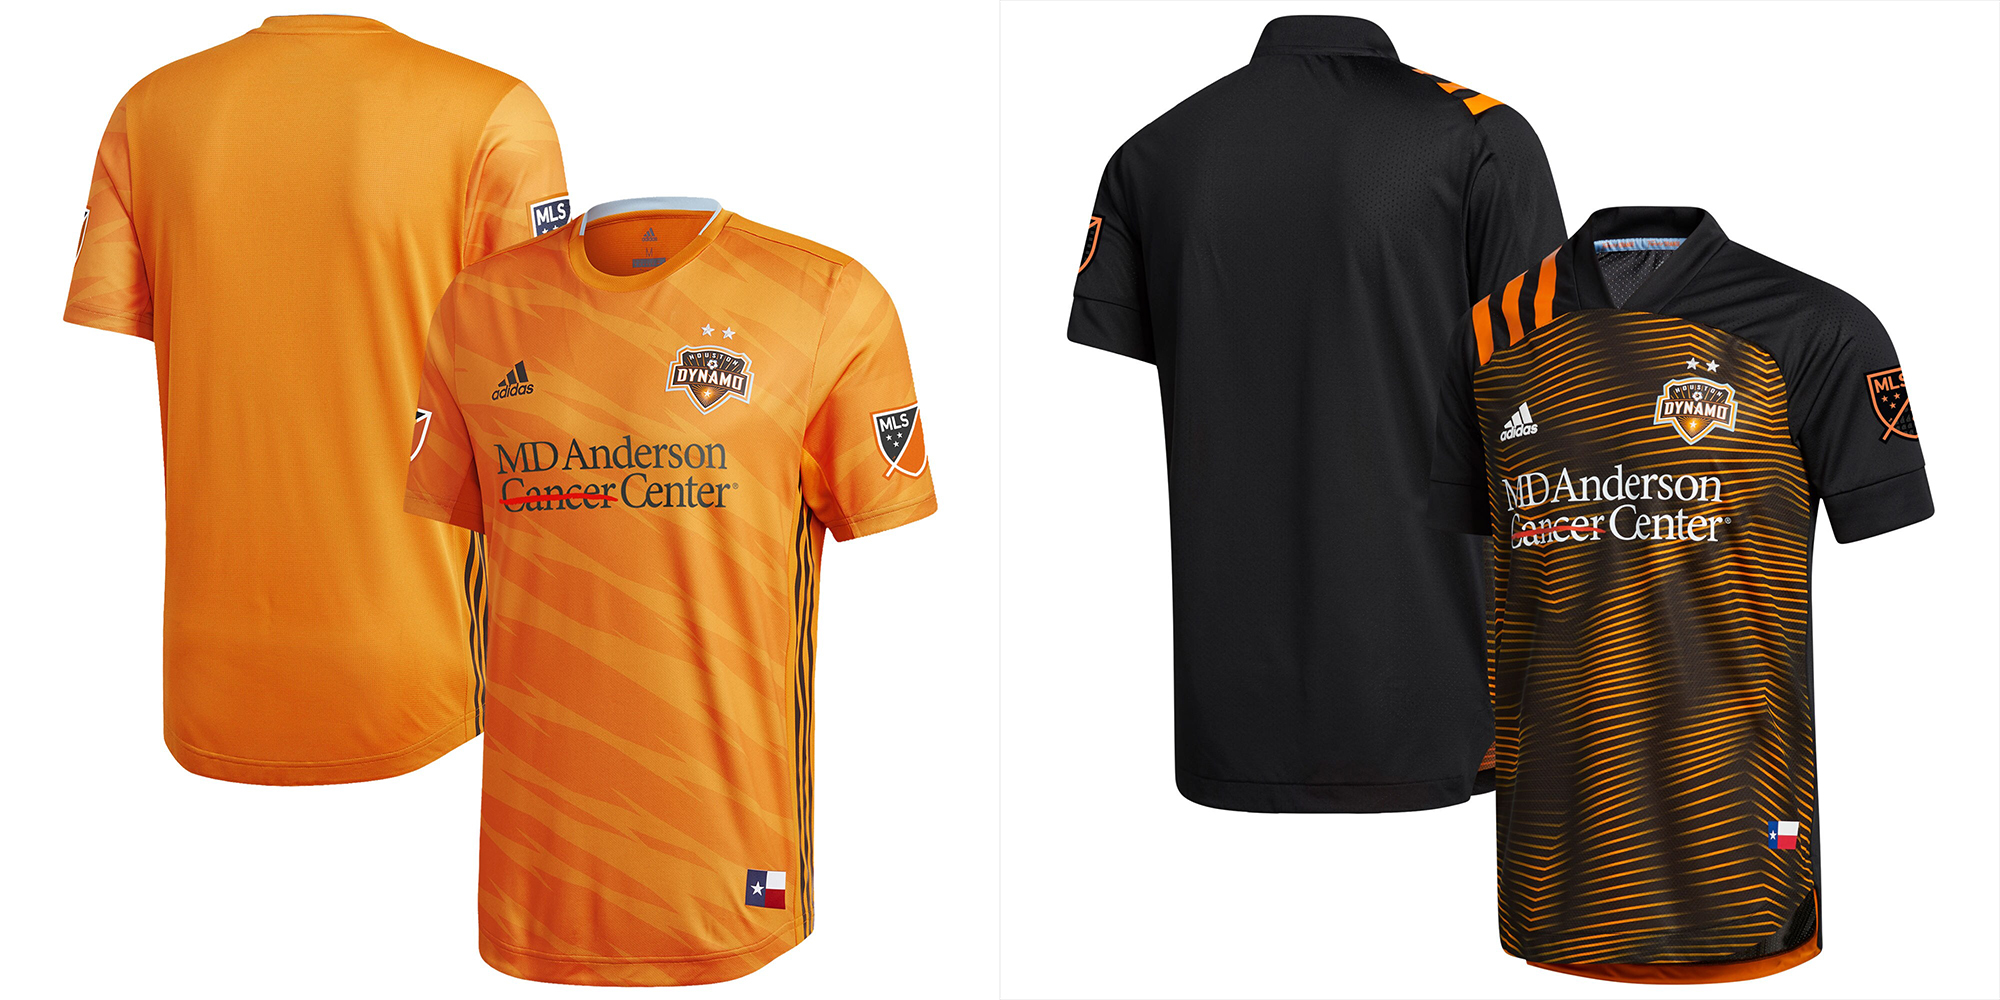 Verblinding Kwijtschelding noedels MLS team kit rankings - the good, the bad, and the ugly - 3rd Degree